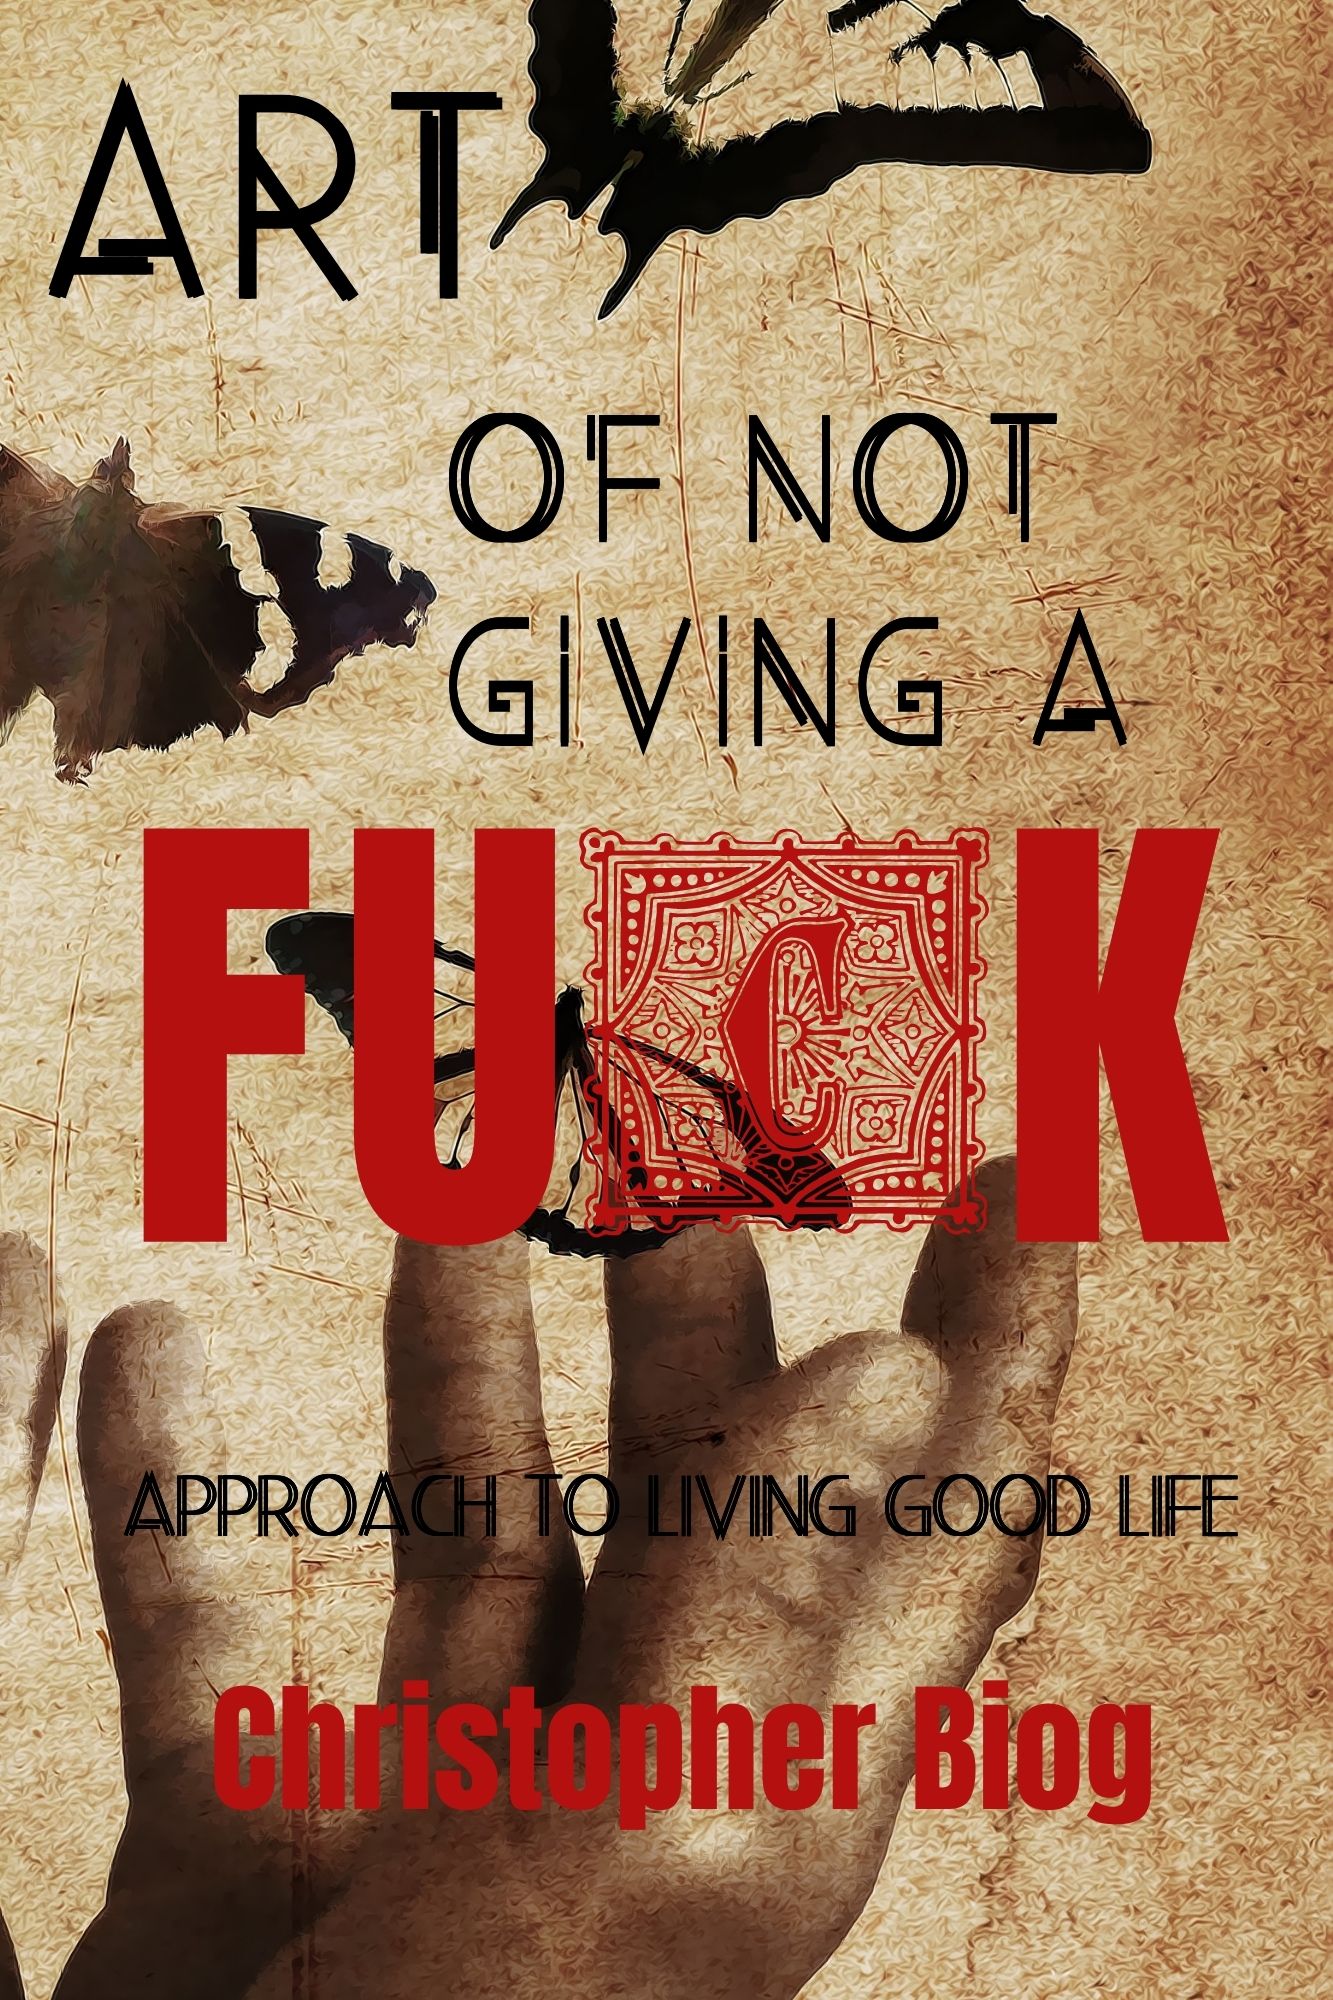 FREE: ART OF NOT GIVING A FUCK by Christopher Biog